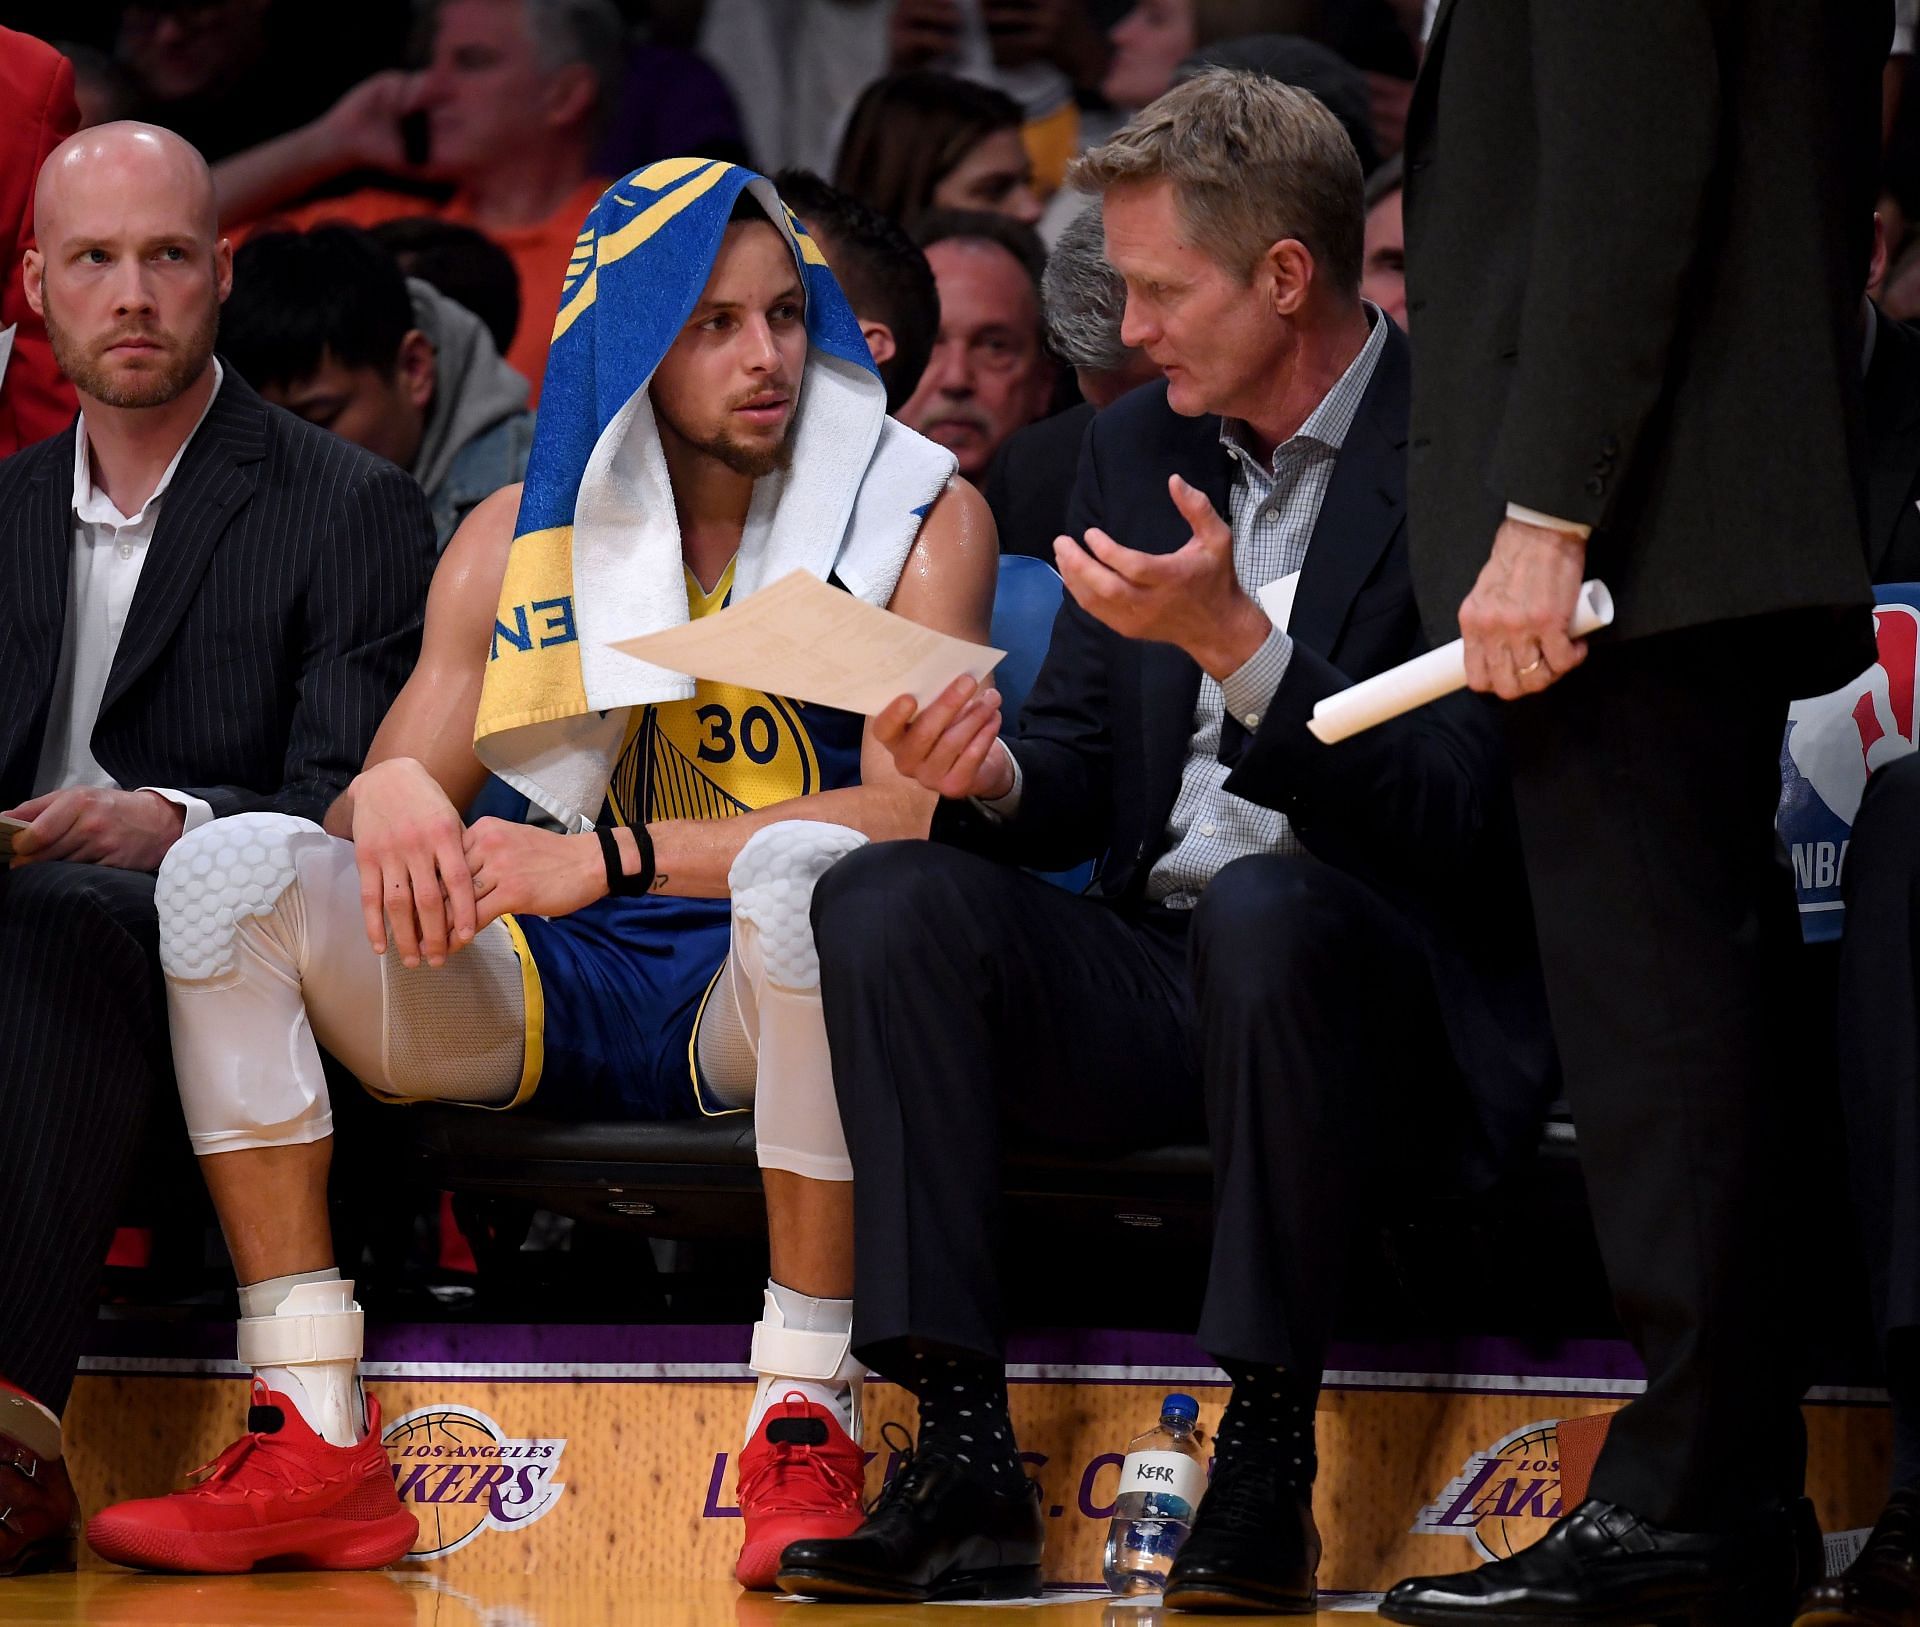 Steve Kerr and Steph Curry discussing in a game for the Golden State Warriors